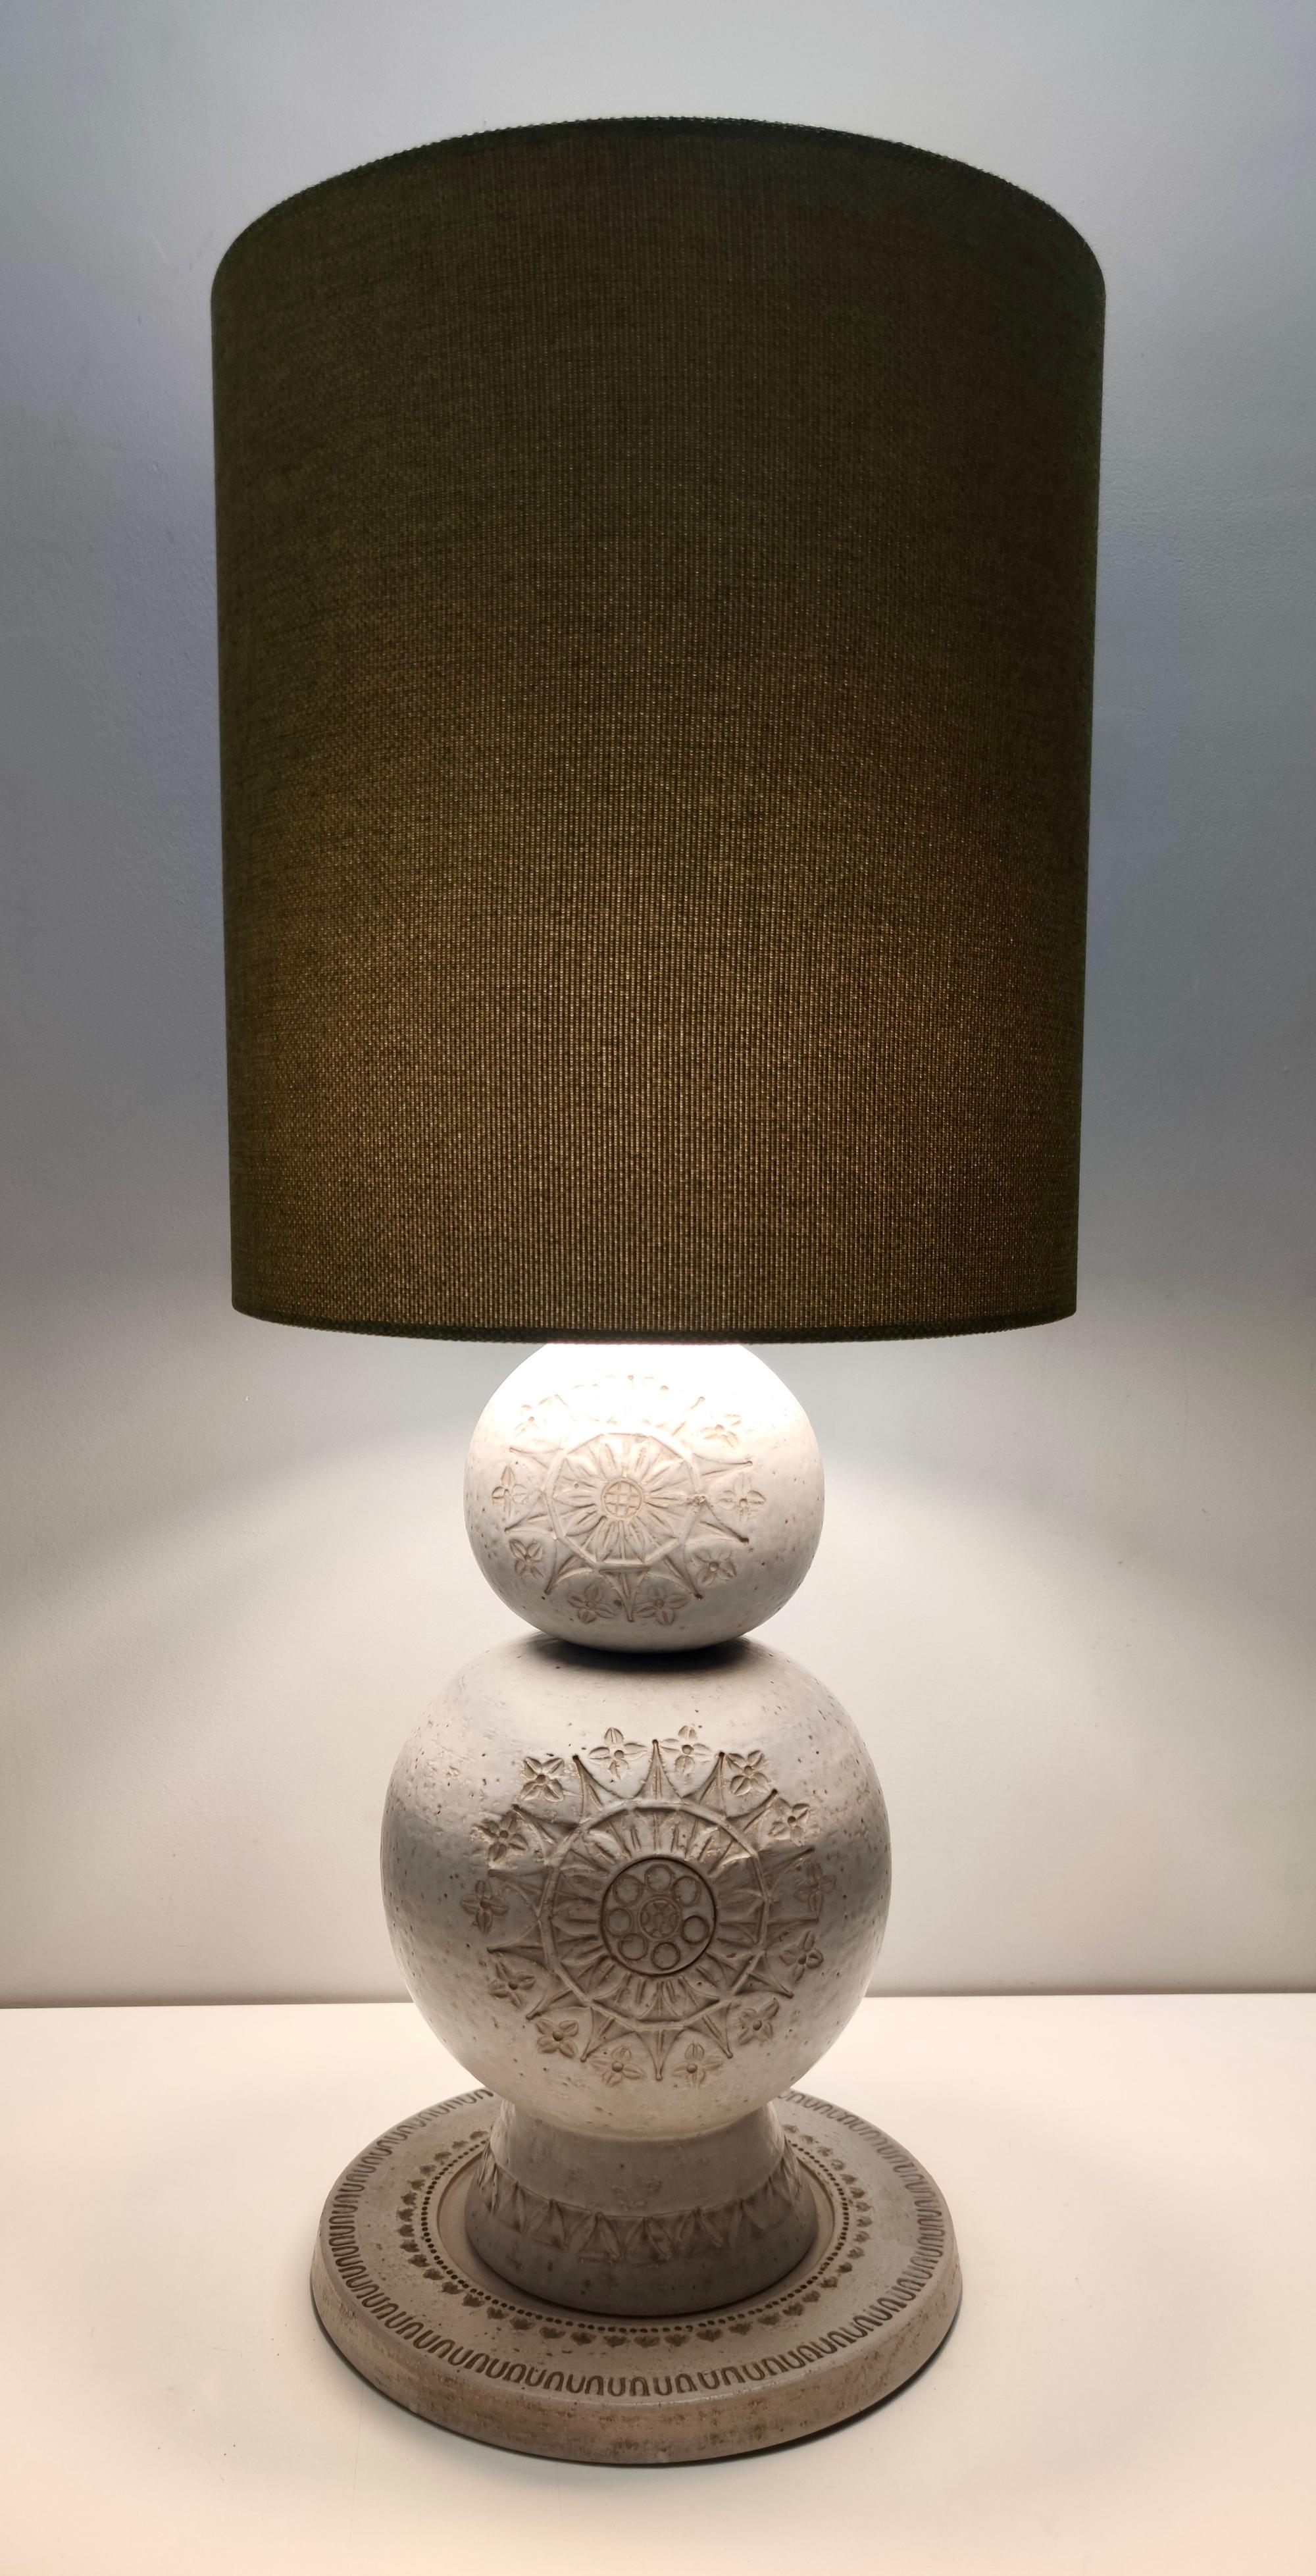 Made in Italy, 1963.
This is a rare and stunning table lamp by Aldo Londi for Bitossi of the series 